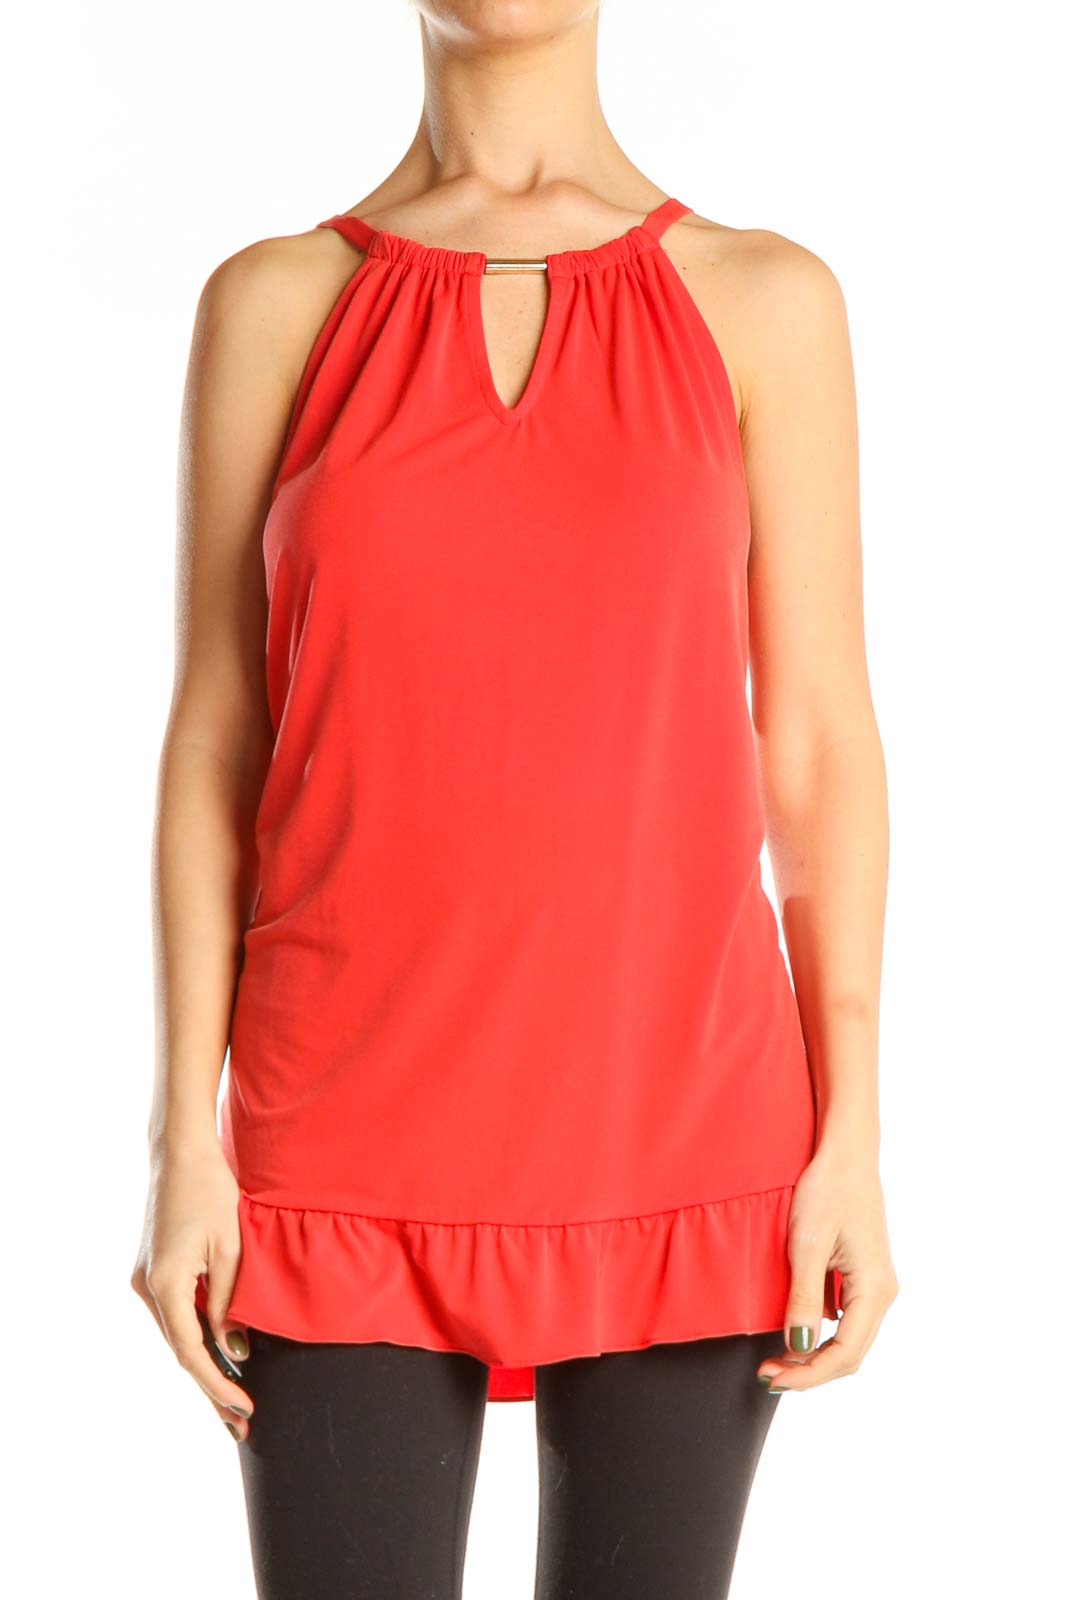 Red Chic Top Front